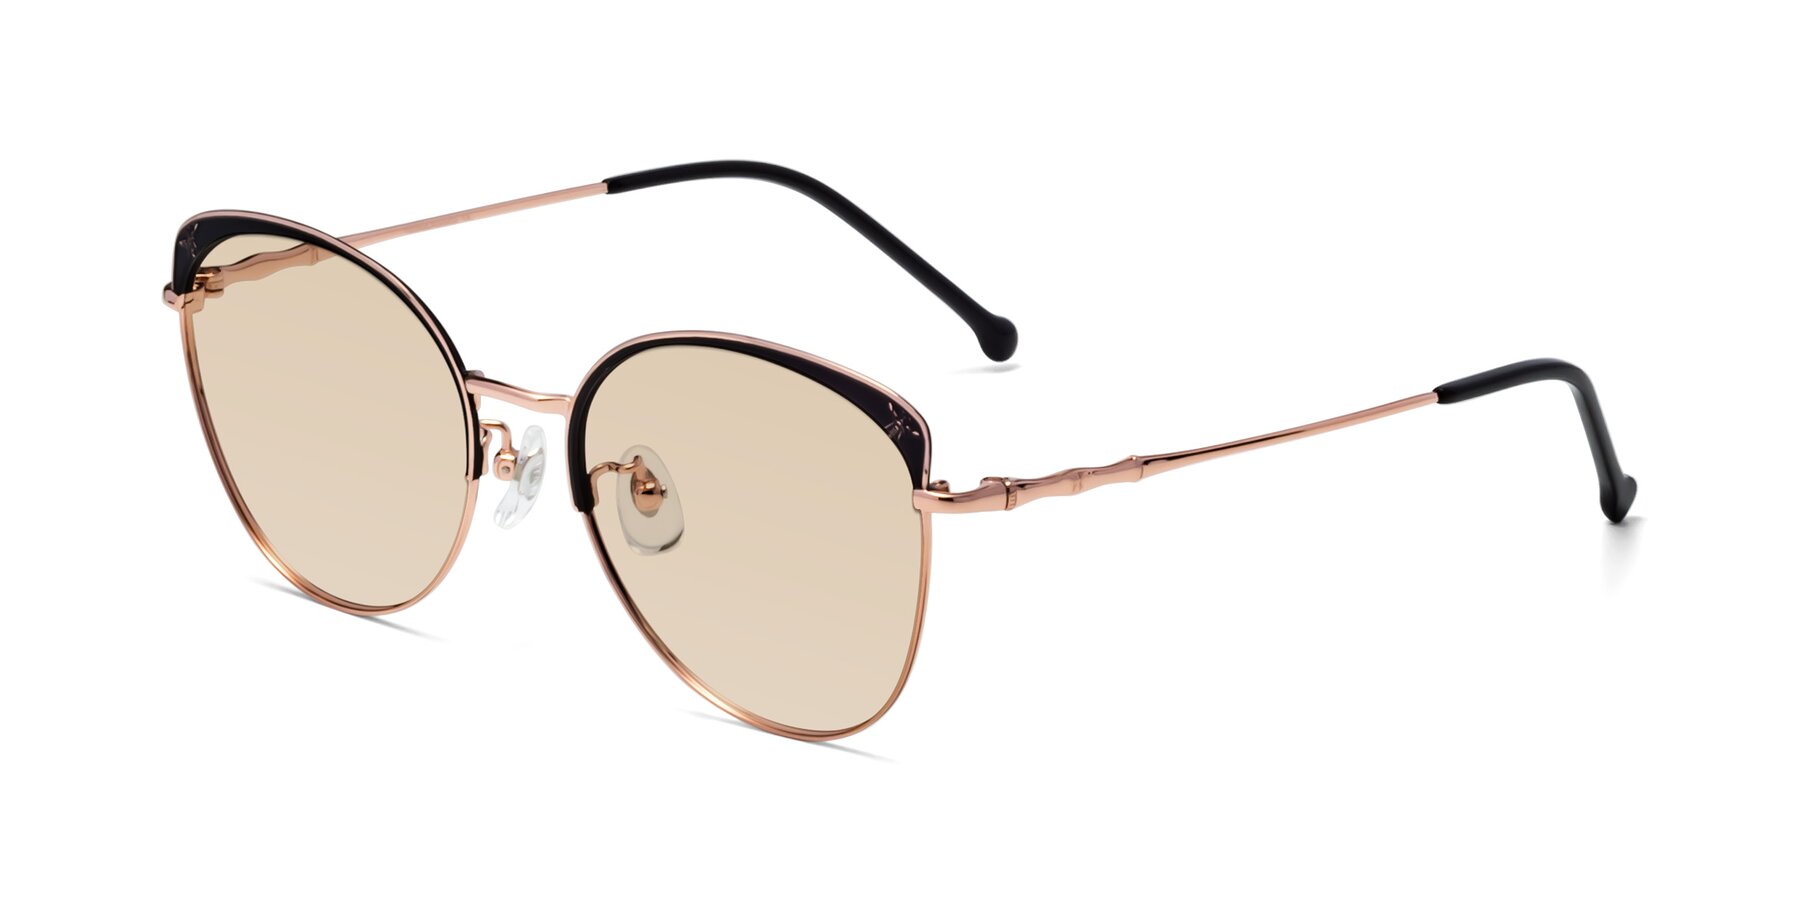 Angle of 18019 in Black-Rose Gold with Light Brown Tinted Lenses